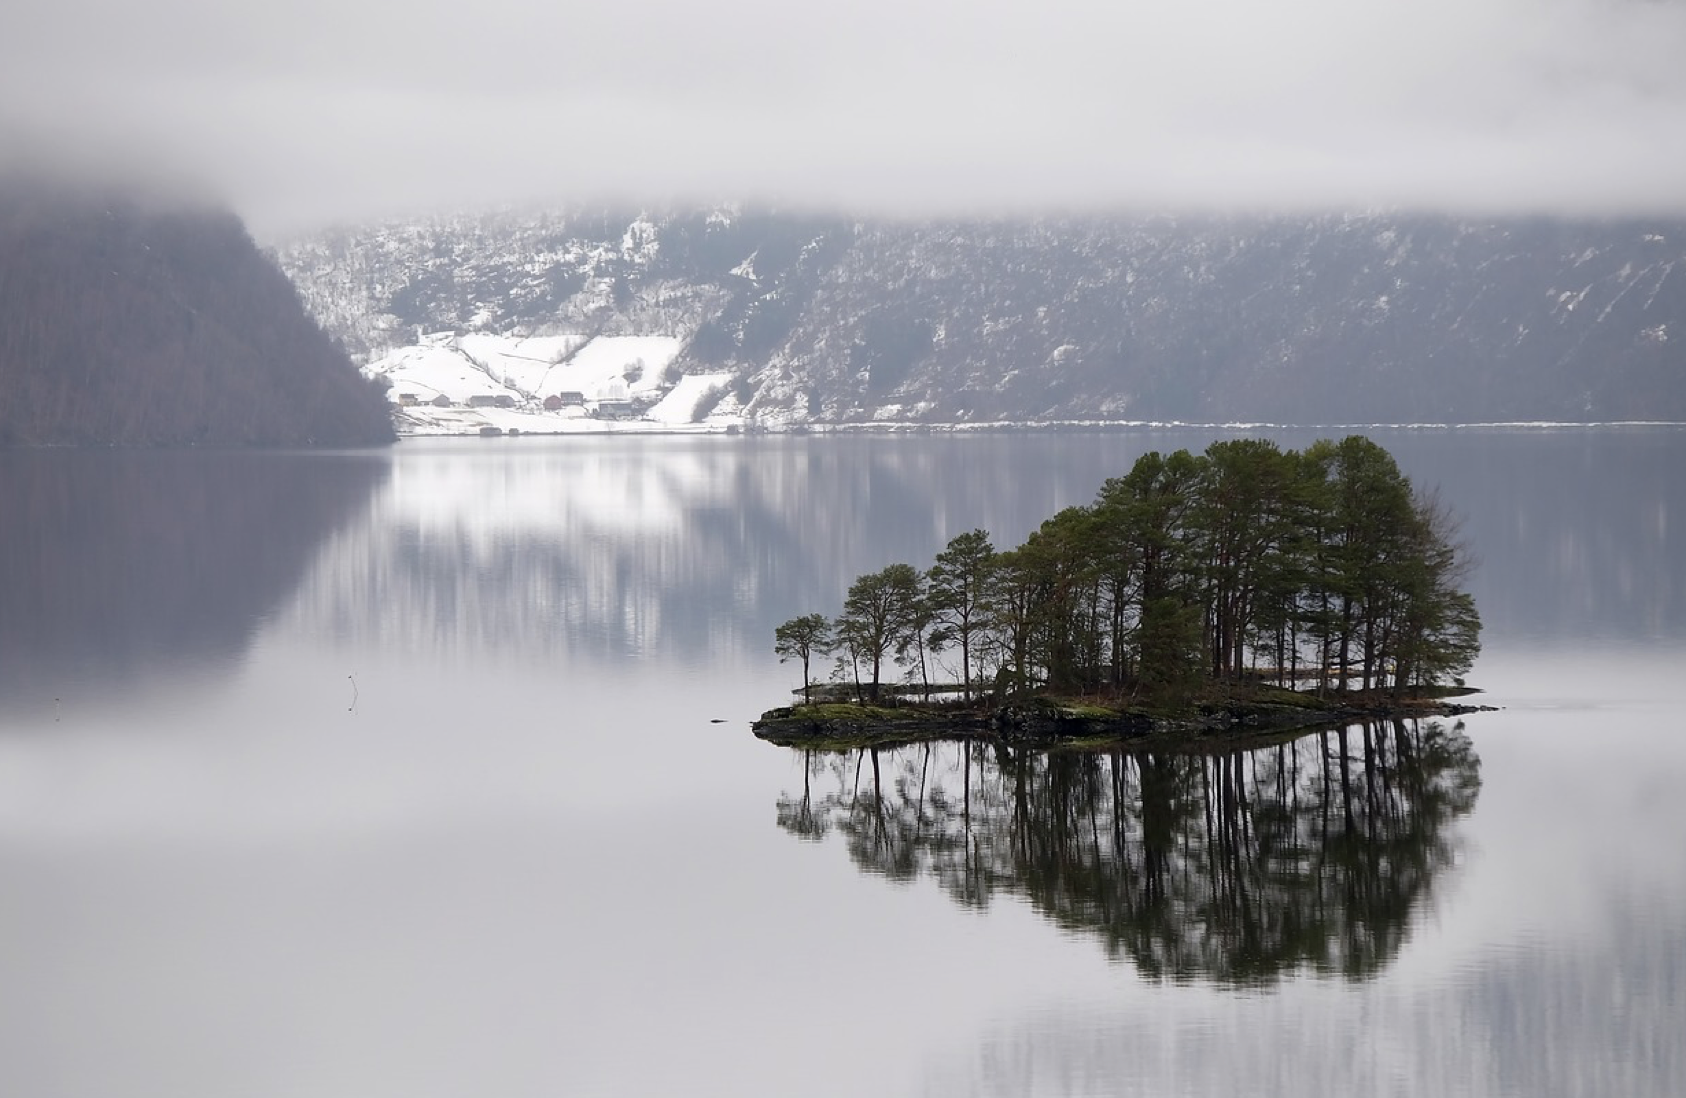 Image of a lake during the winter with a small island reflecting on the calm water.